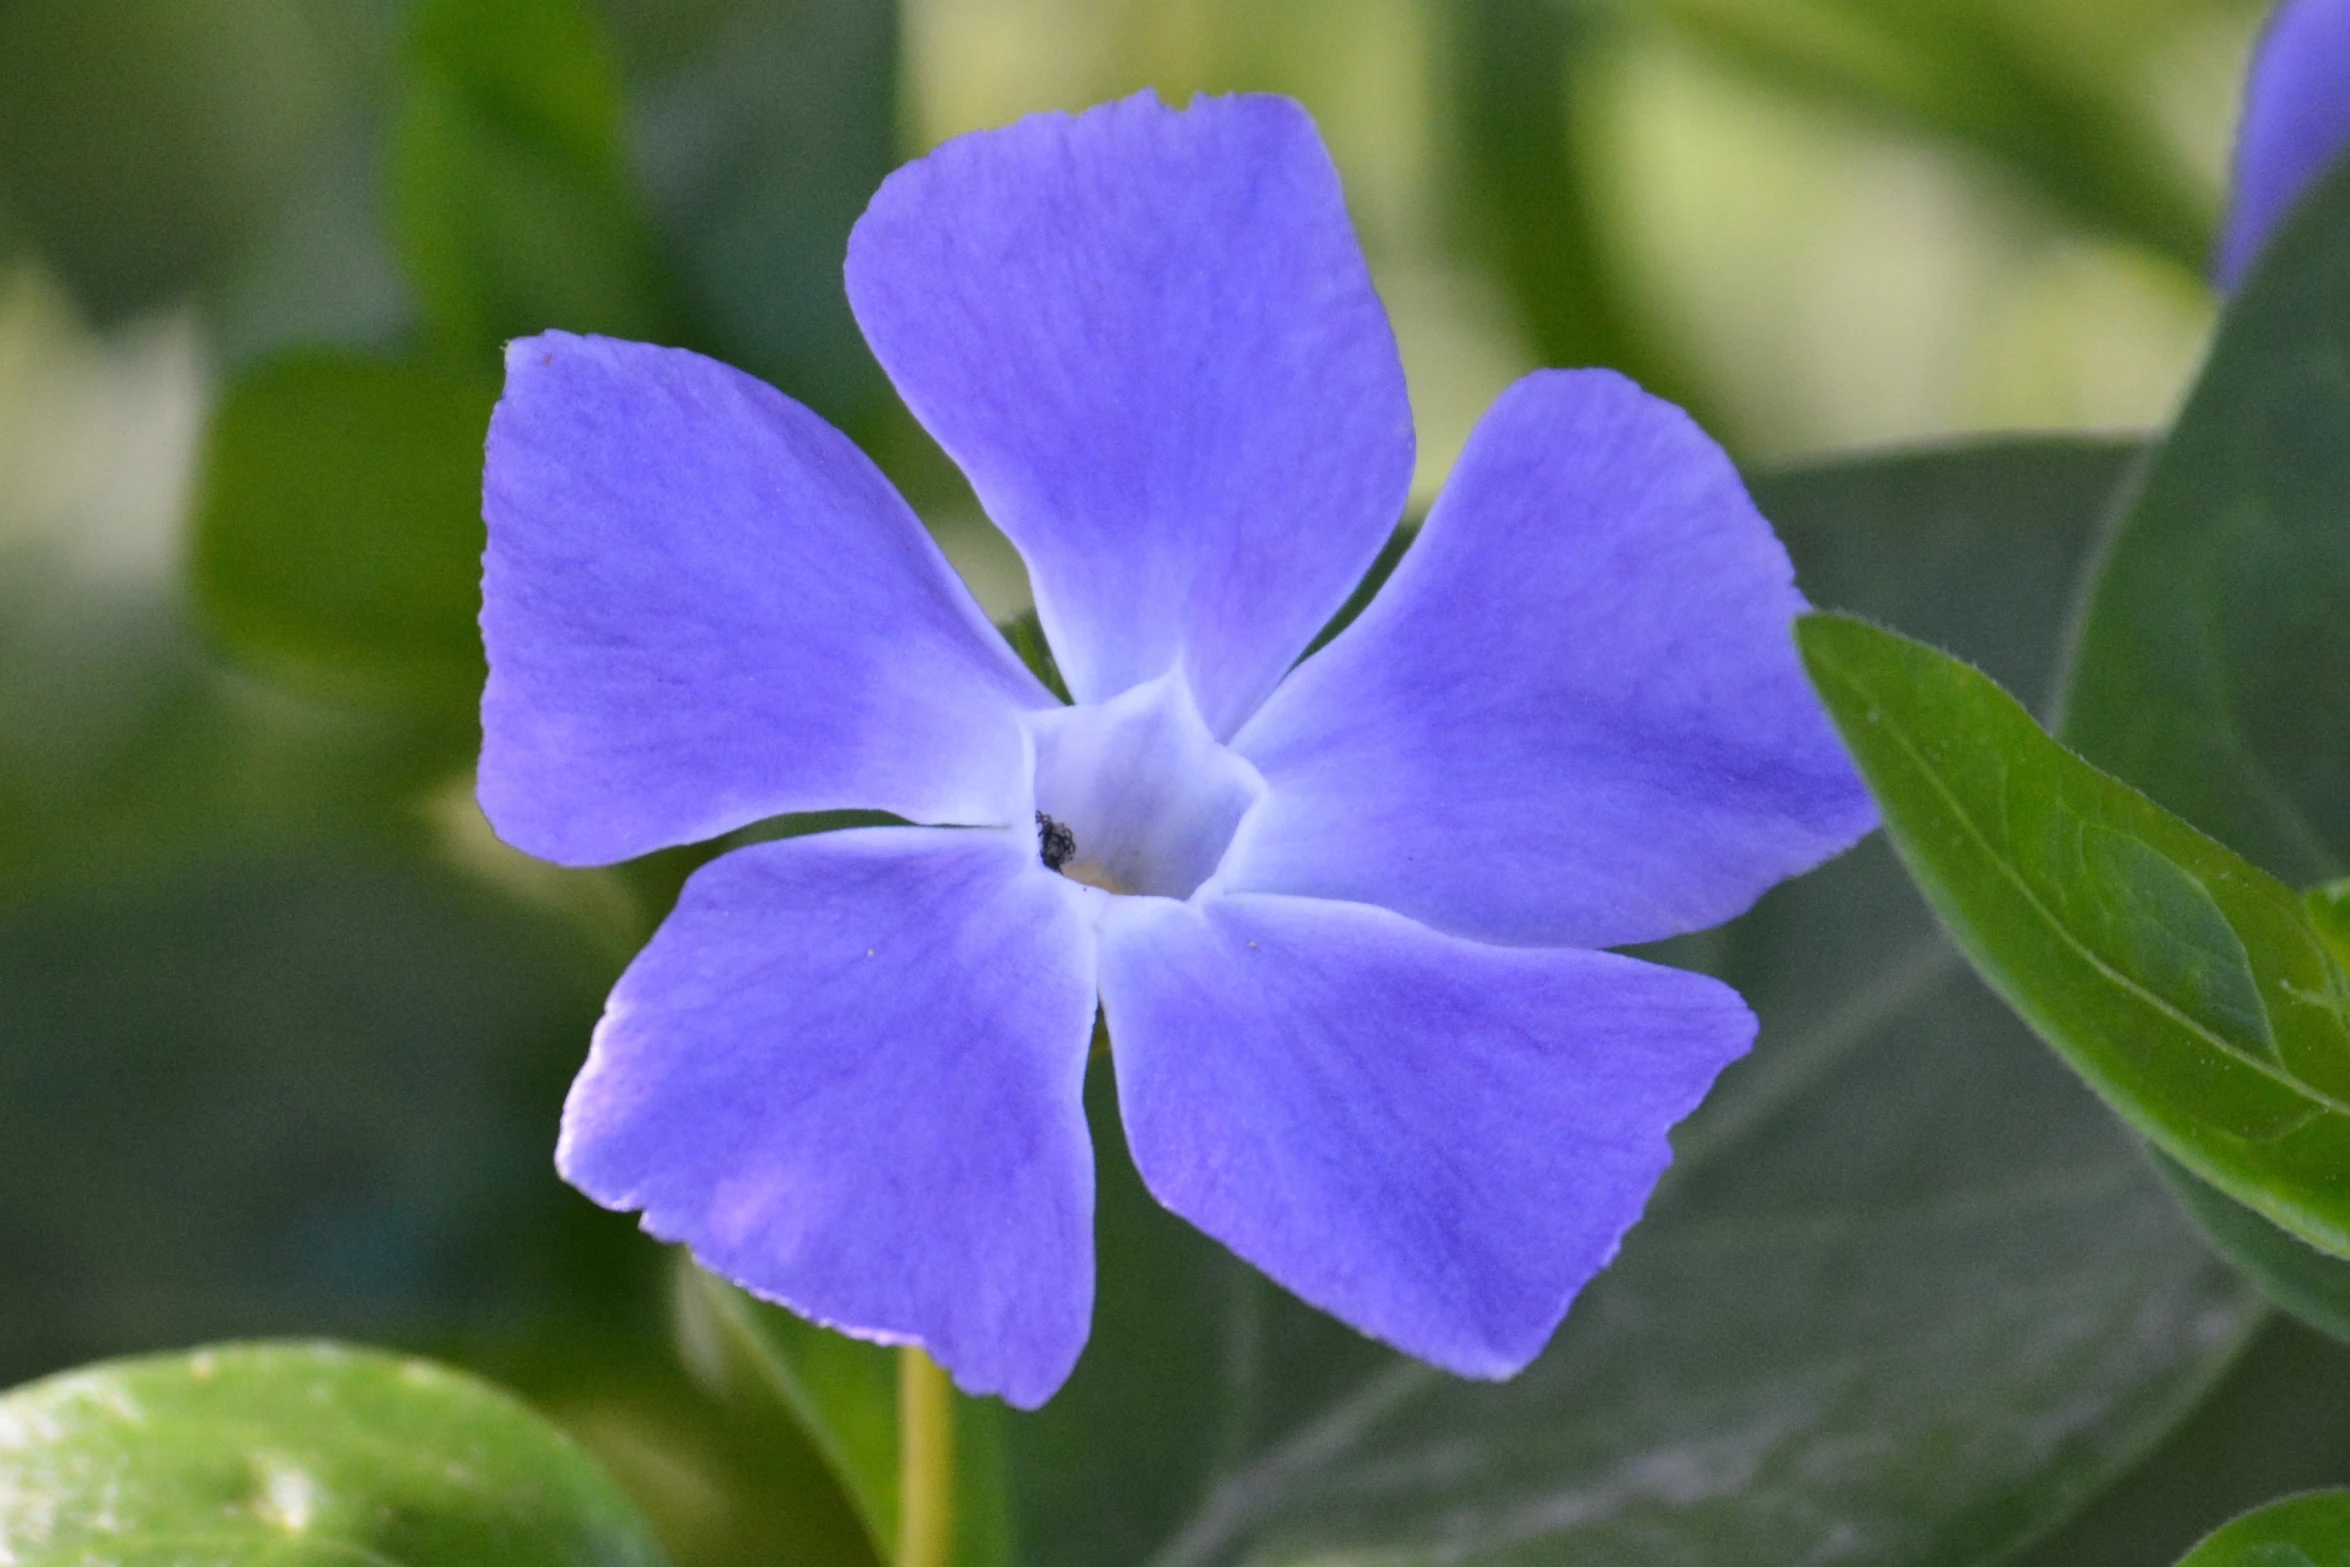 purple flowers are shown on green leaves